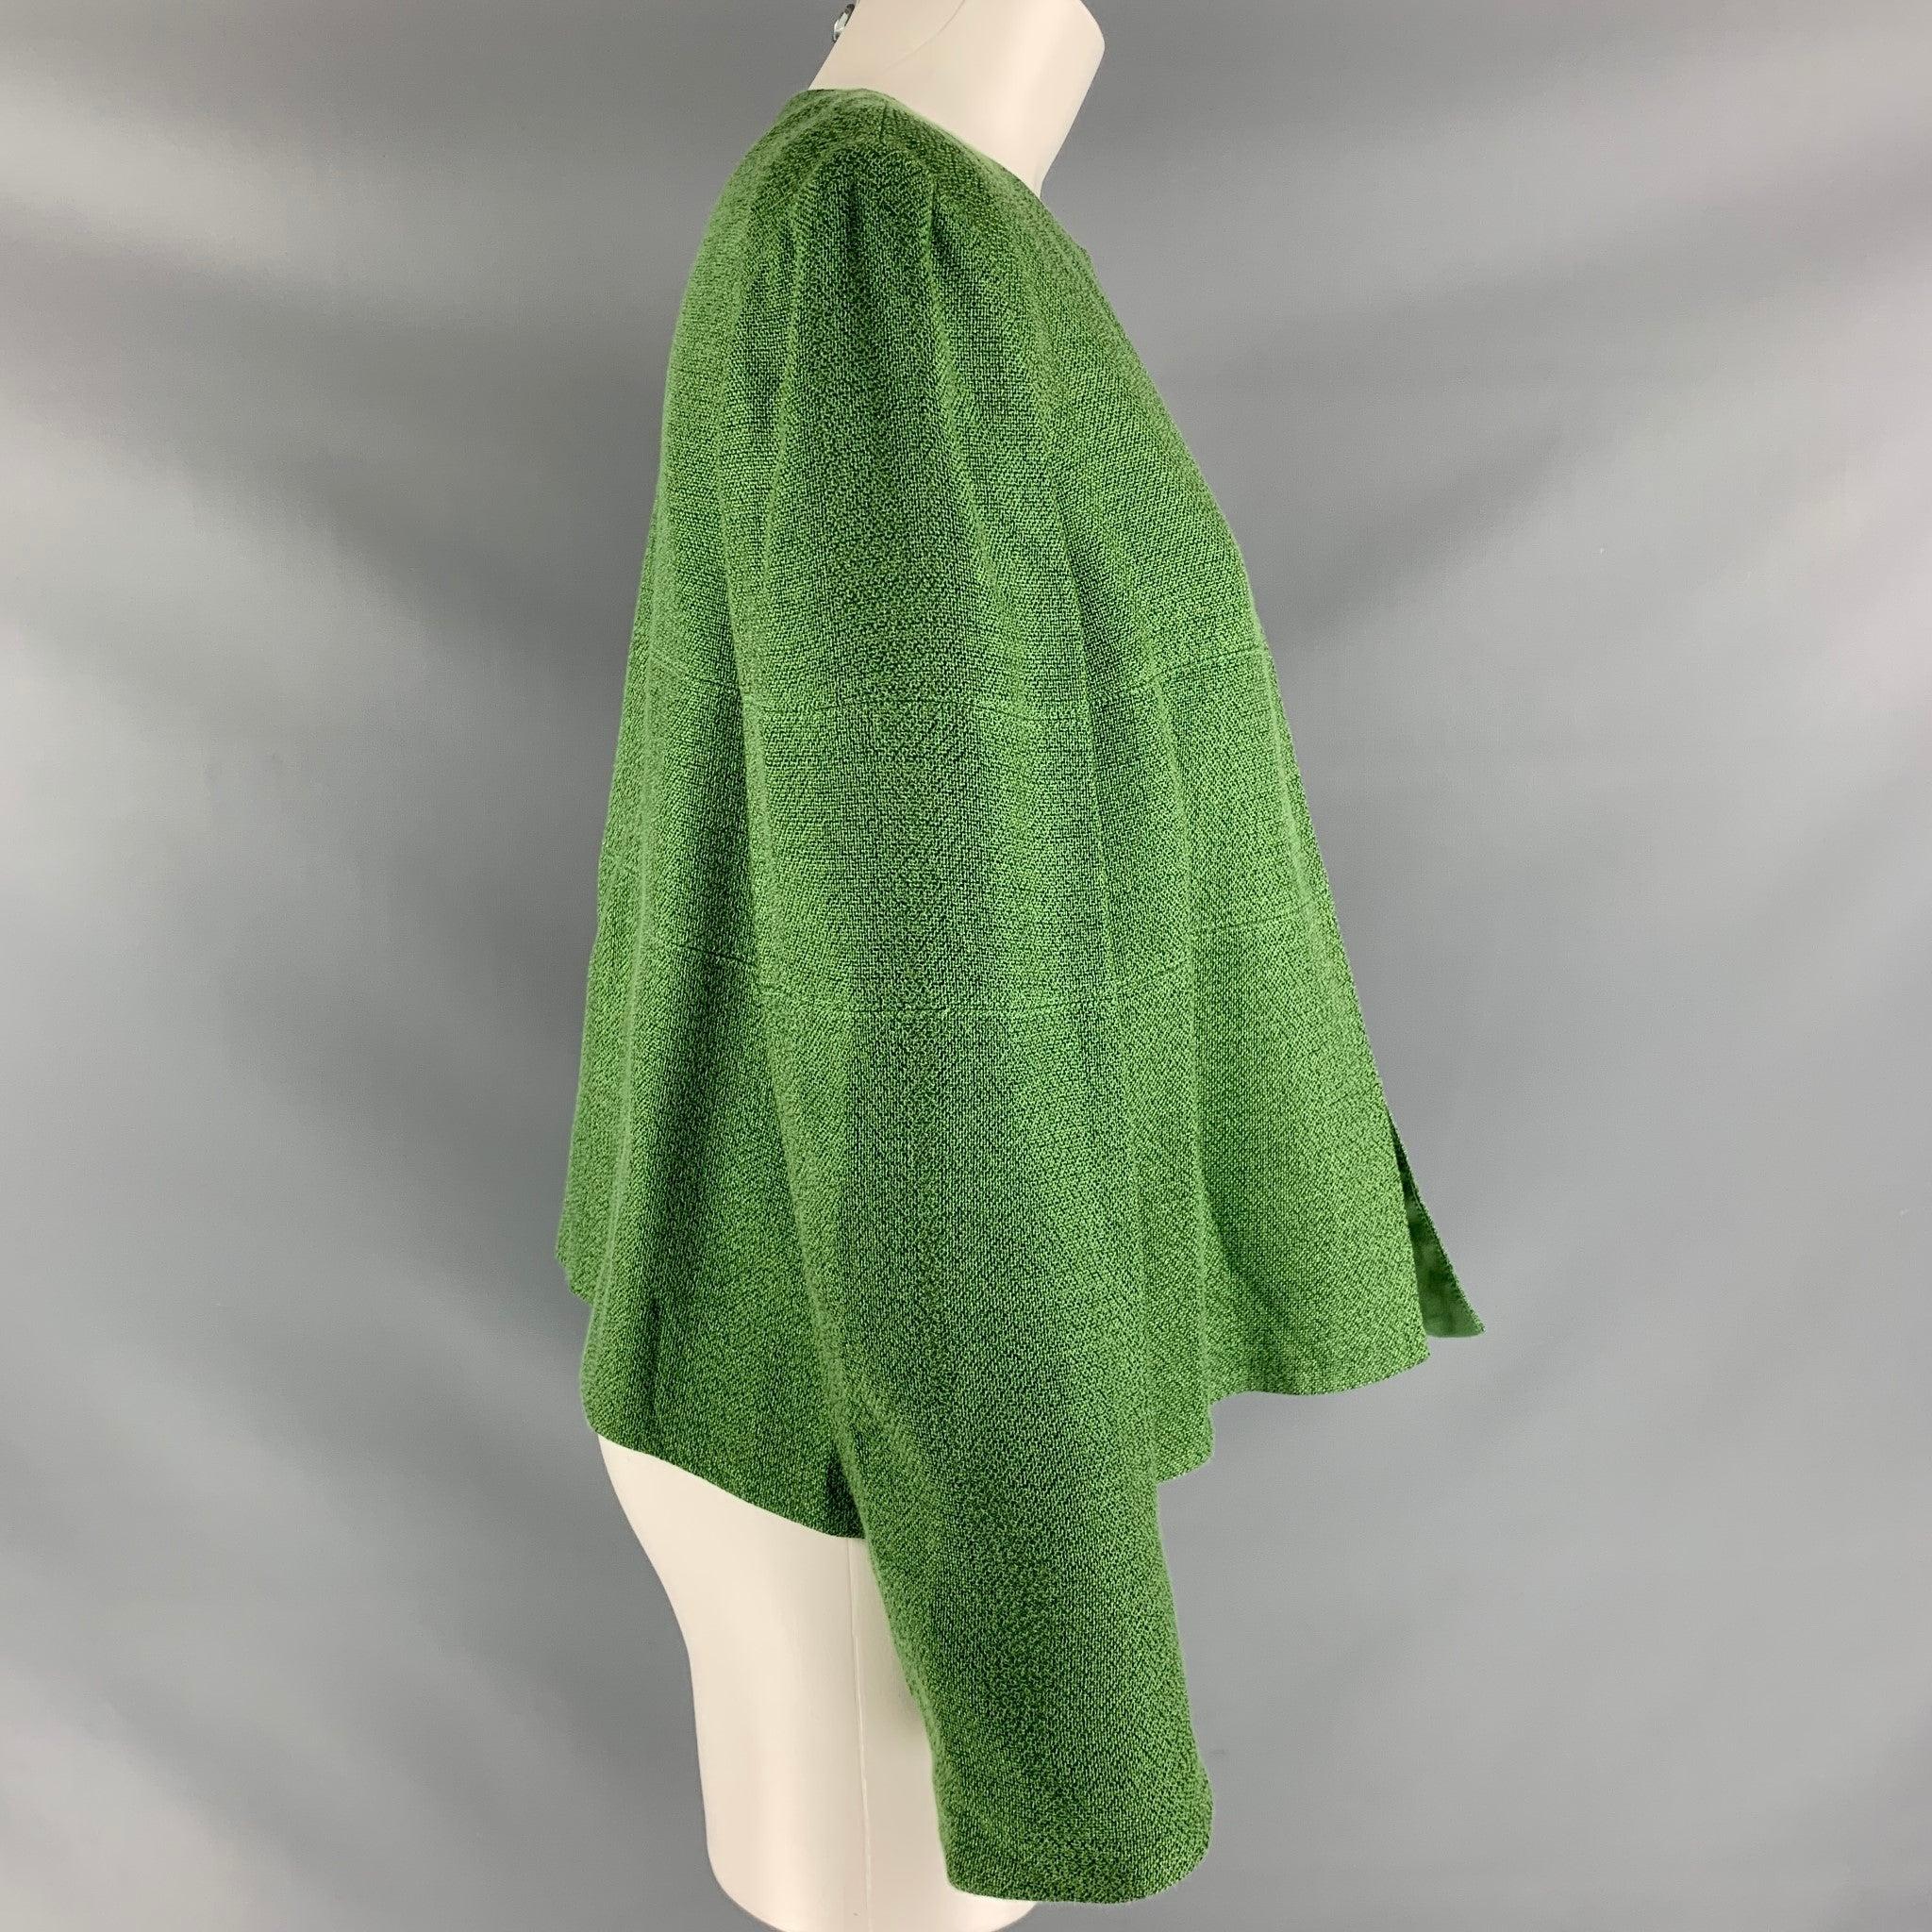 ARMANI COLLEZIONI long sleeve jacket comes in green viscose blend fabric, no collar and boxy silhouette. New with Tag. 

Marked:   12 

Measurements: 
 
Shoulder: 16.5 inBust: 42 inSleeve: 25 inLength: 24 in

  
  
 
Reference: 110929
Category: